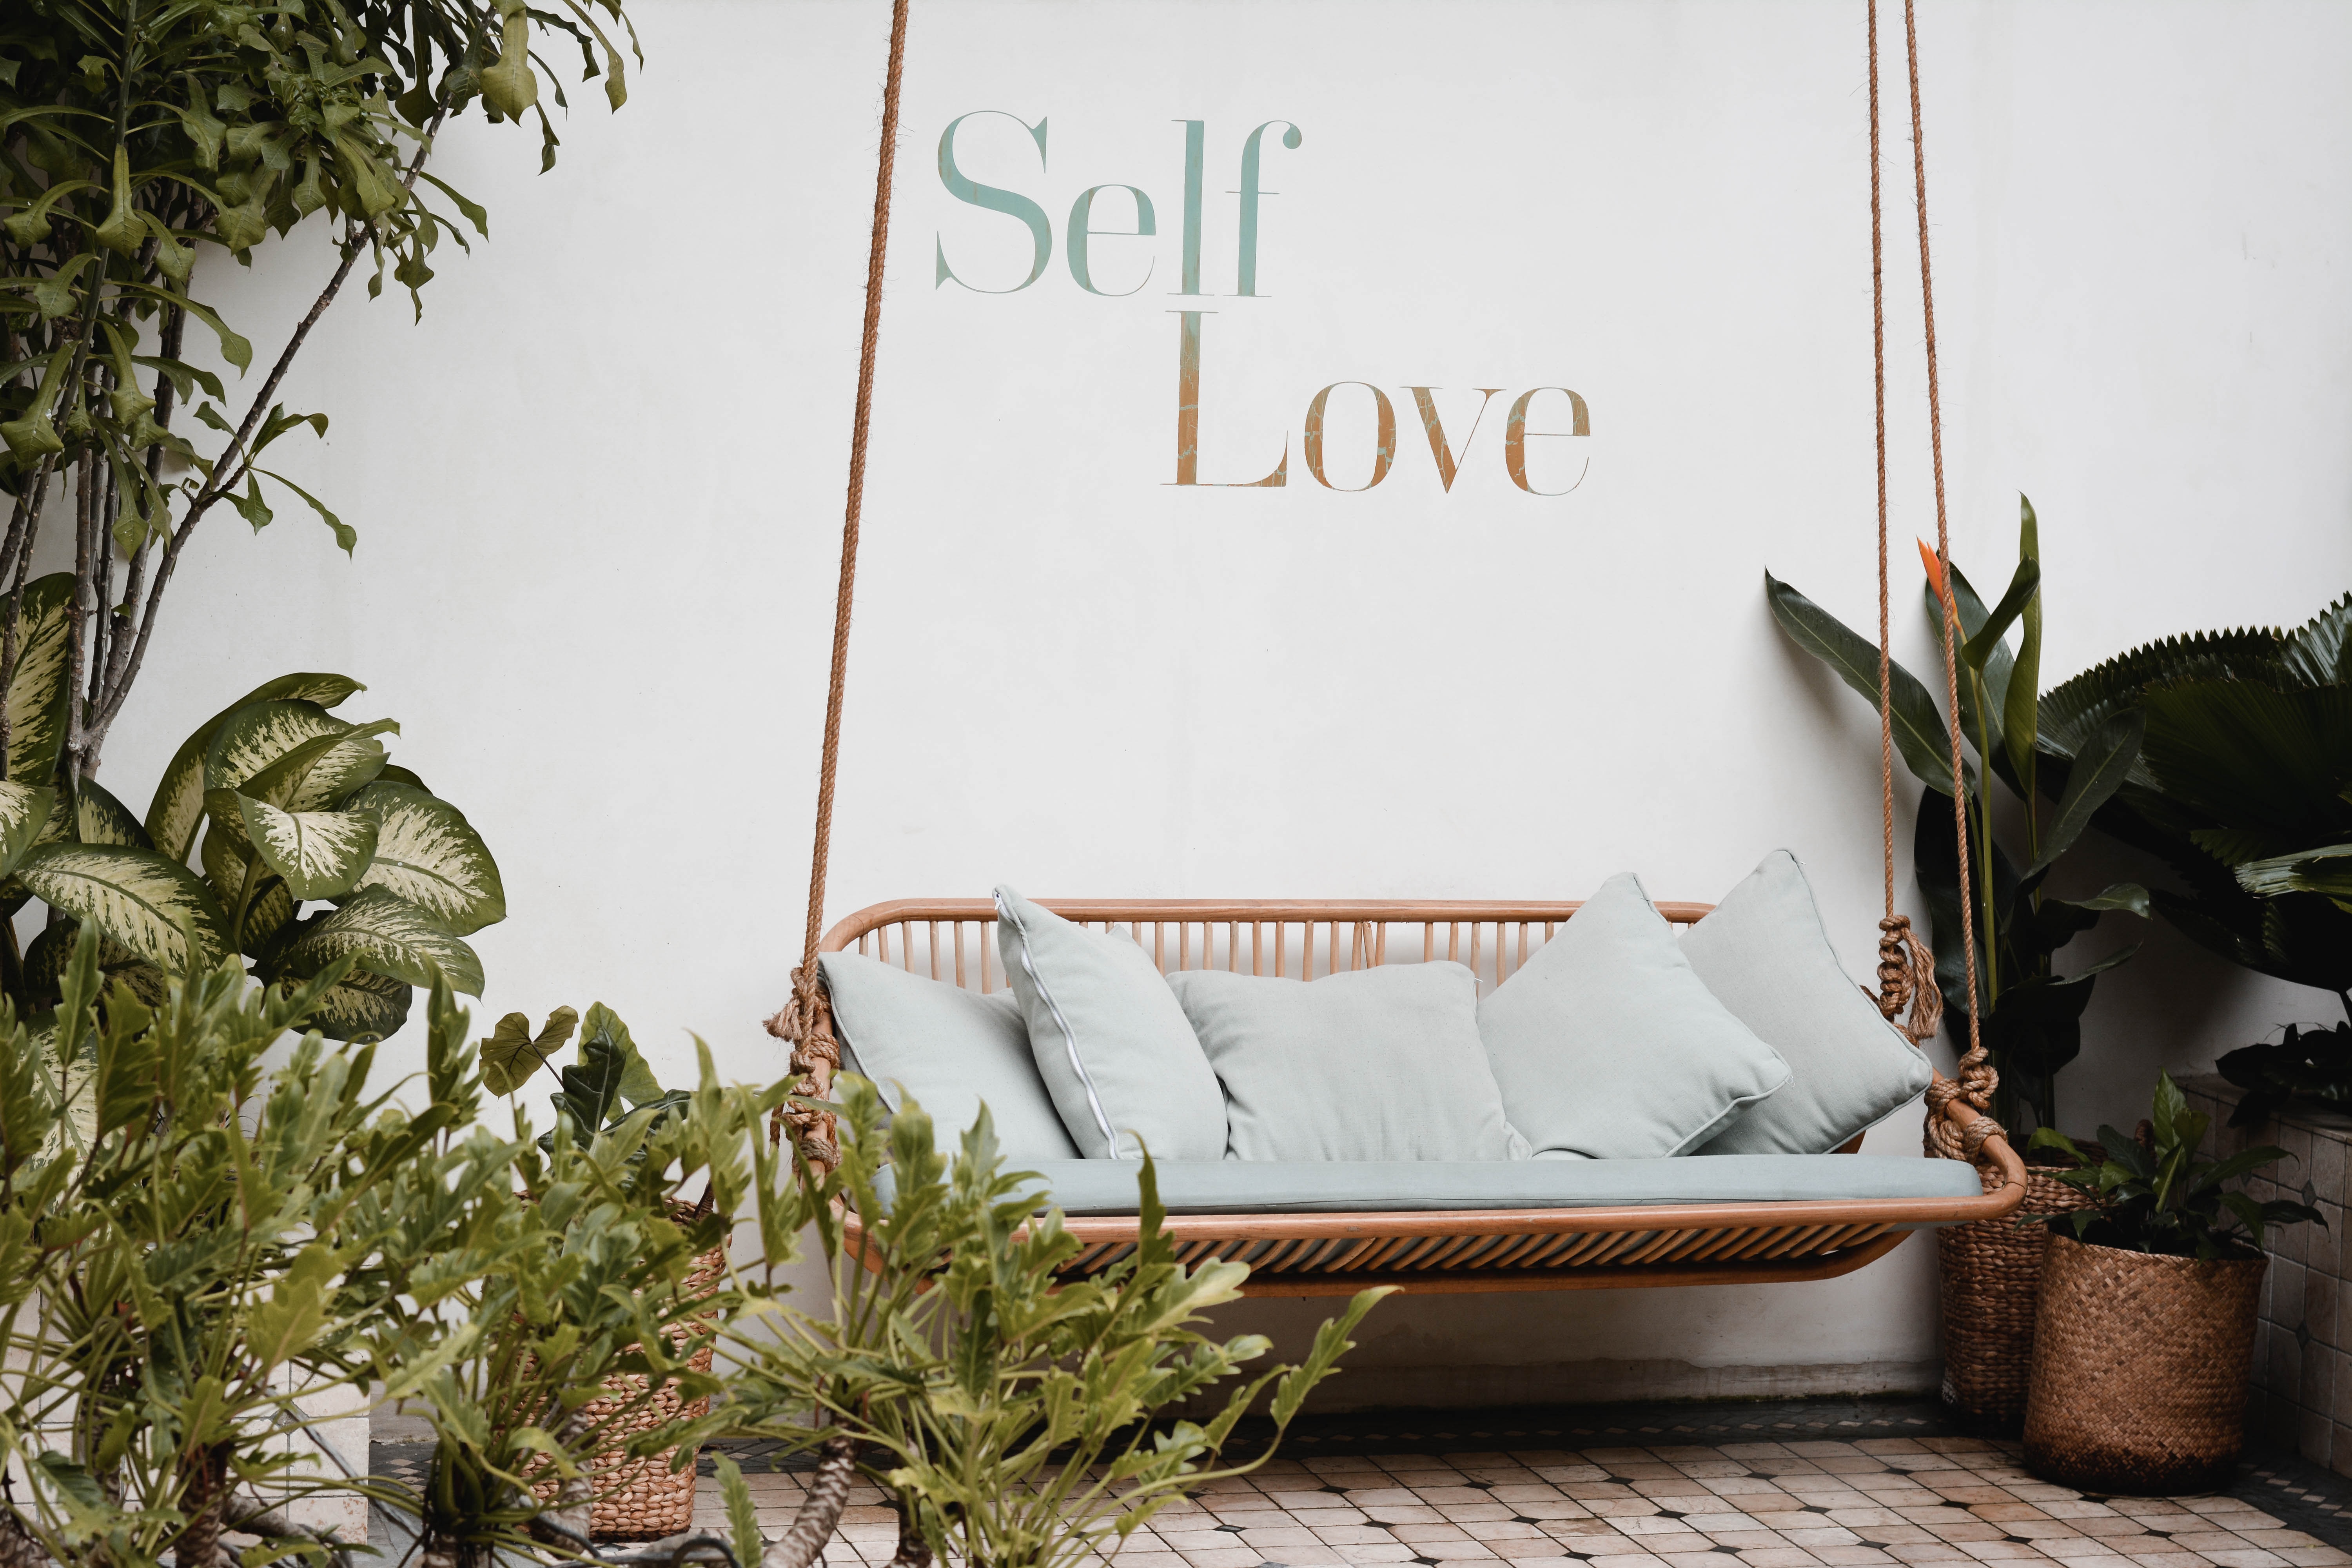 A hanging garden bench with a wall sign that reads "self love" behind it.